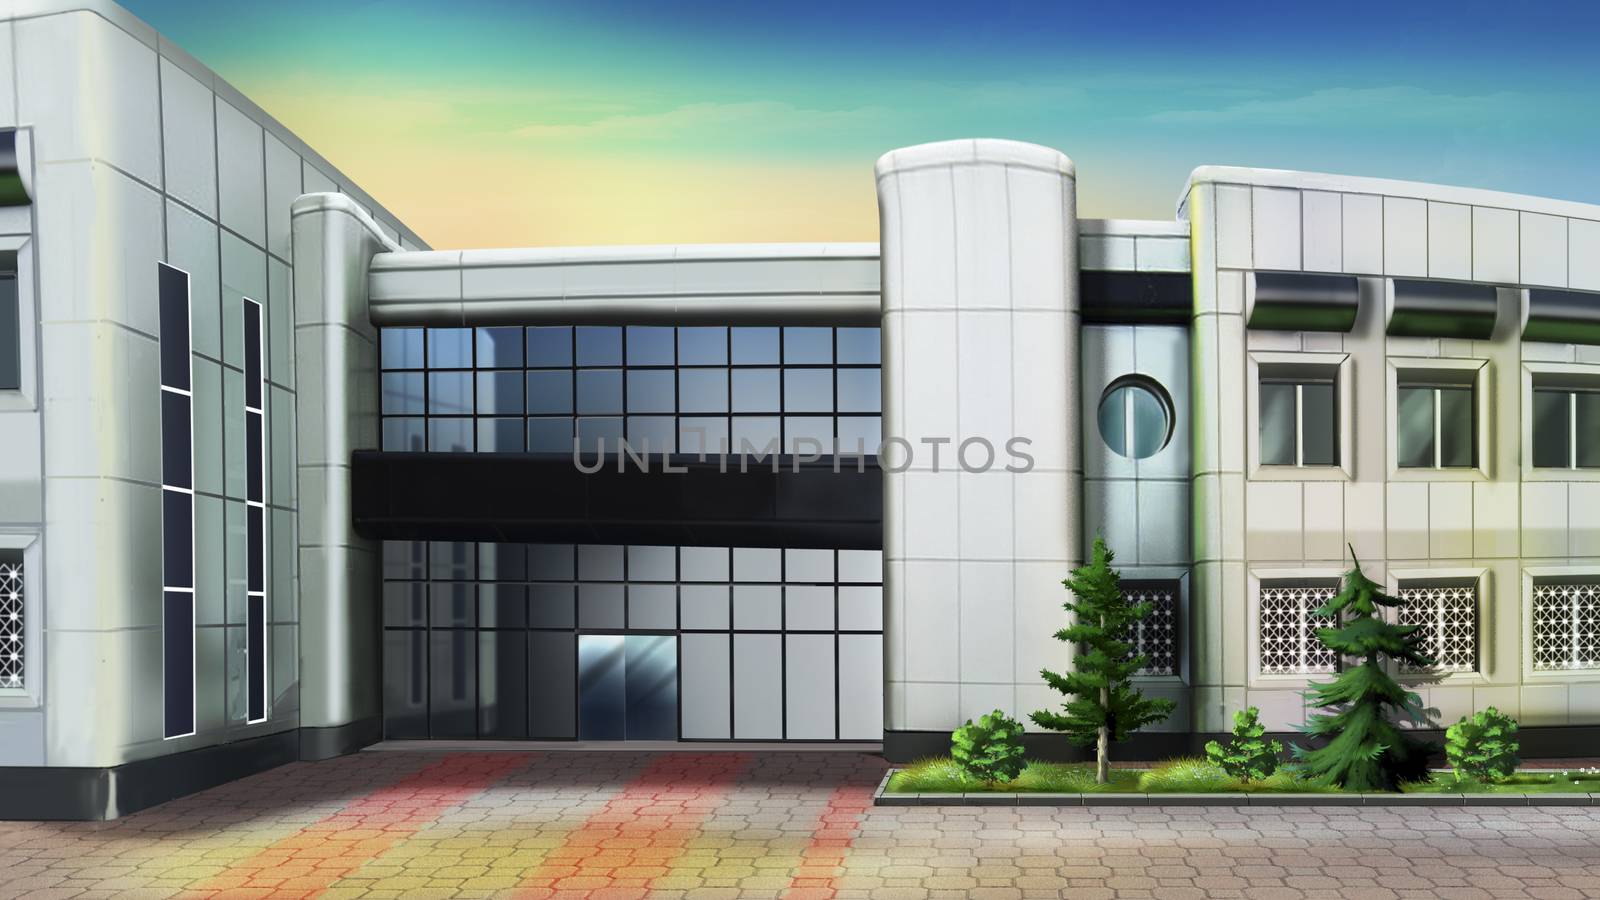 Digital painting of the office building